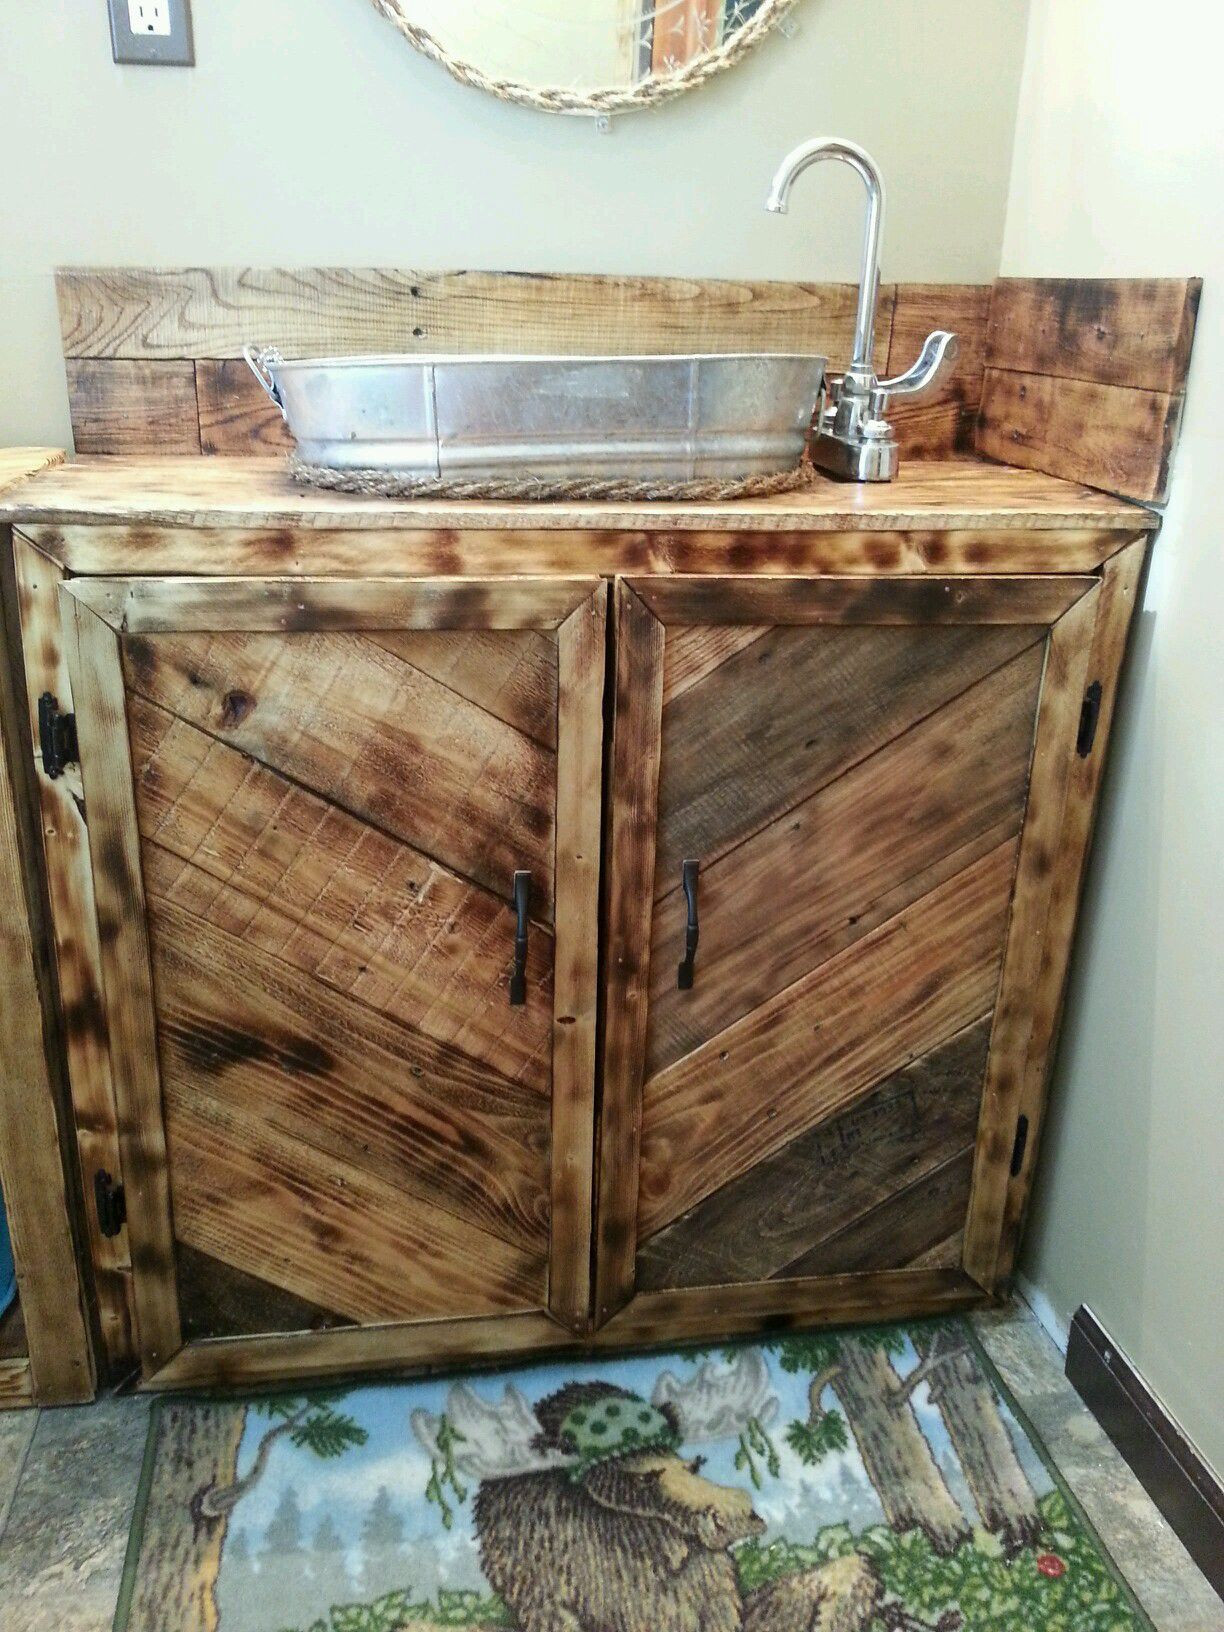 Pallet Bathroom Vanity
 I could create something like this from the existing